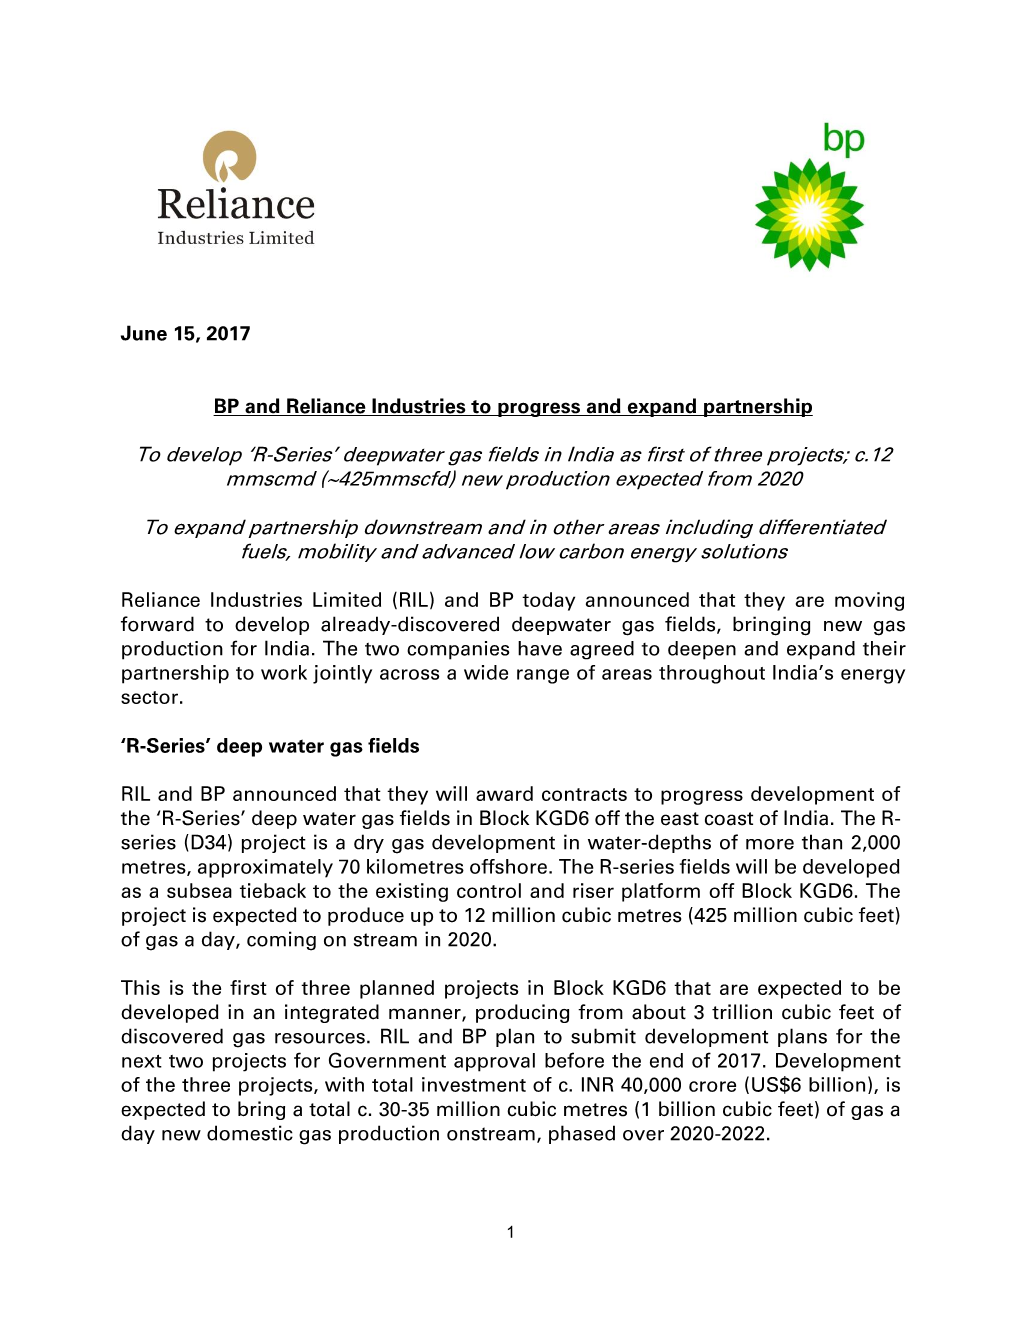 June 15, 2017 BP and Reliance Industries to Progress and Expand Partnership to Develop 'R-Series' Deepwater Gas Fields in I